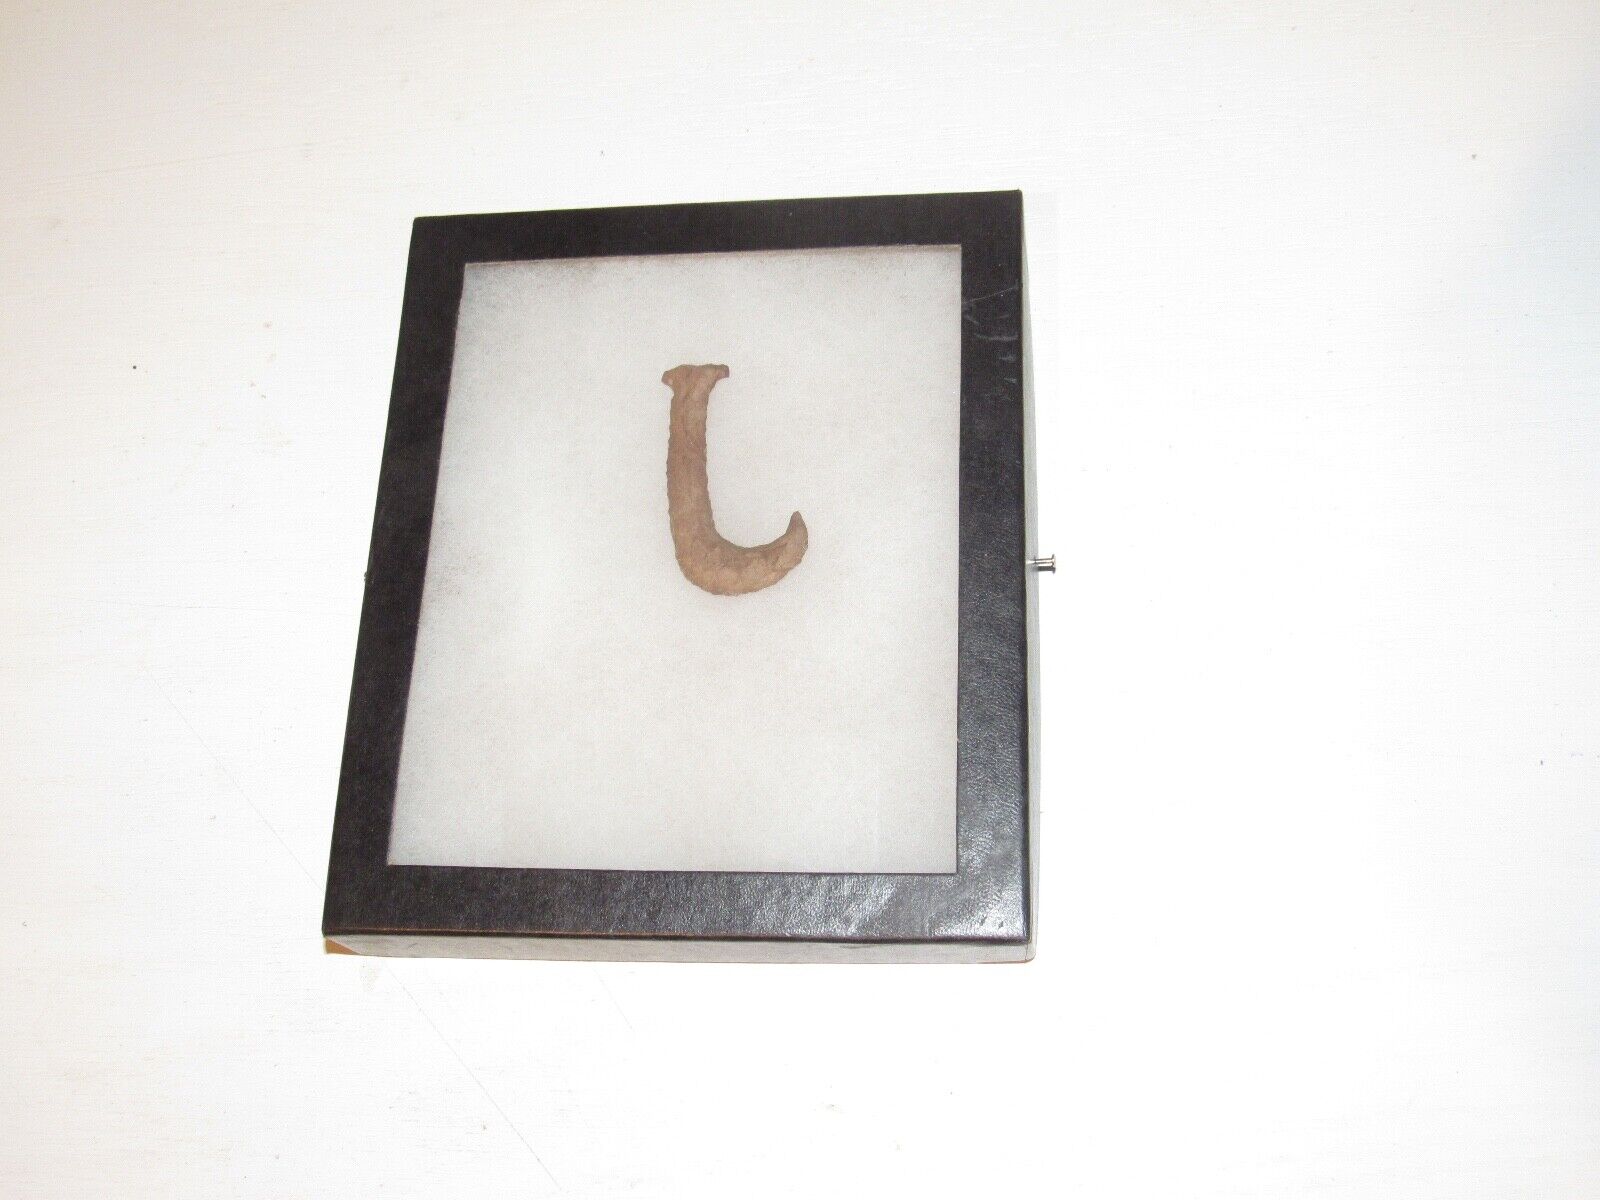 Genuine Bone Fish Hook Encased with a cotton backing - Pre-Historic?